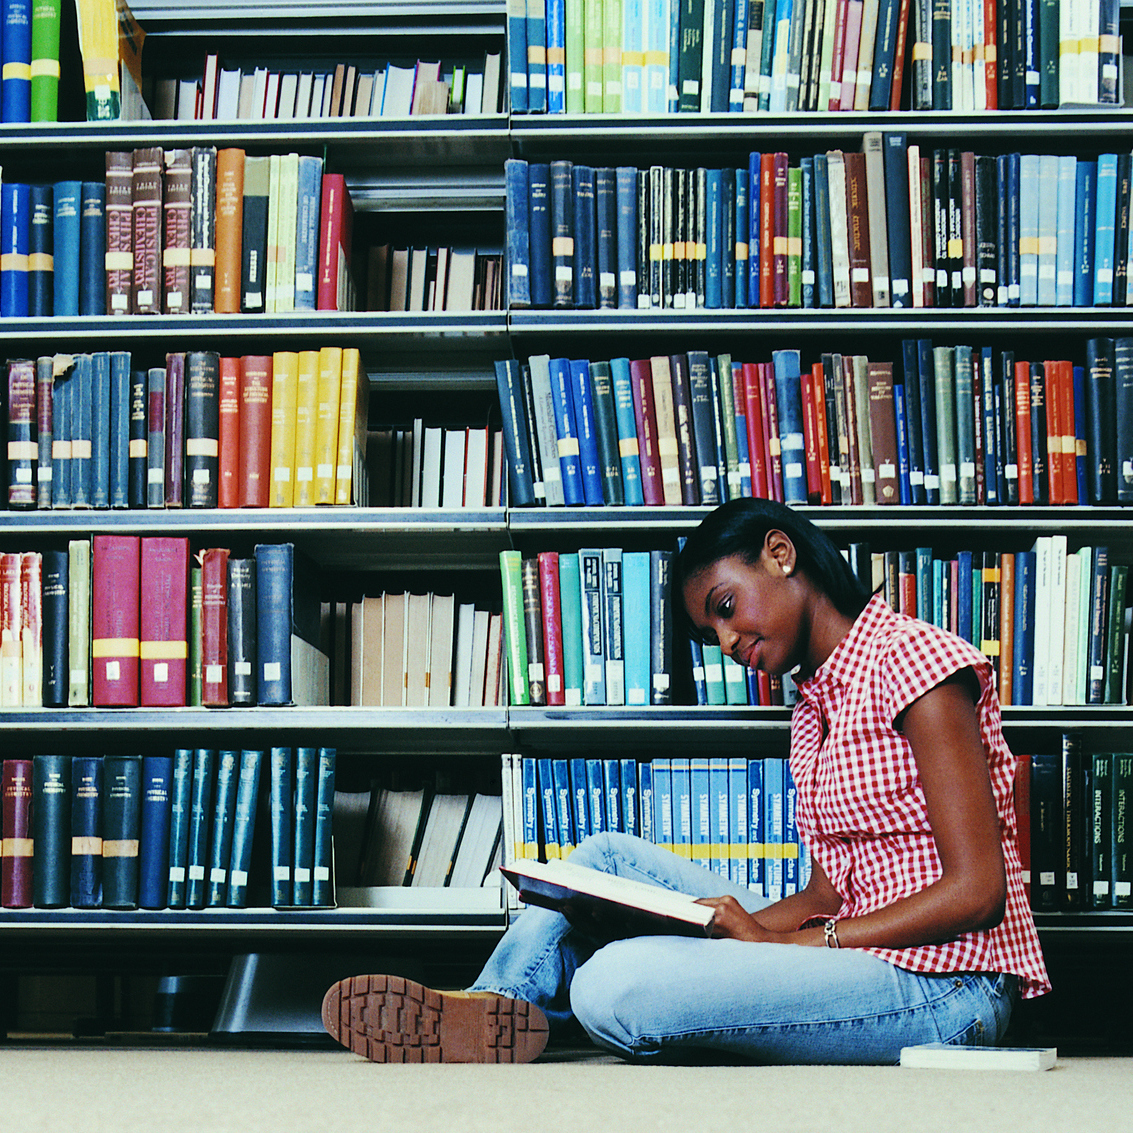 Female University student sitting in library reading a book.